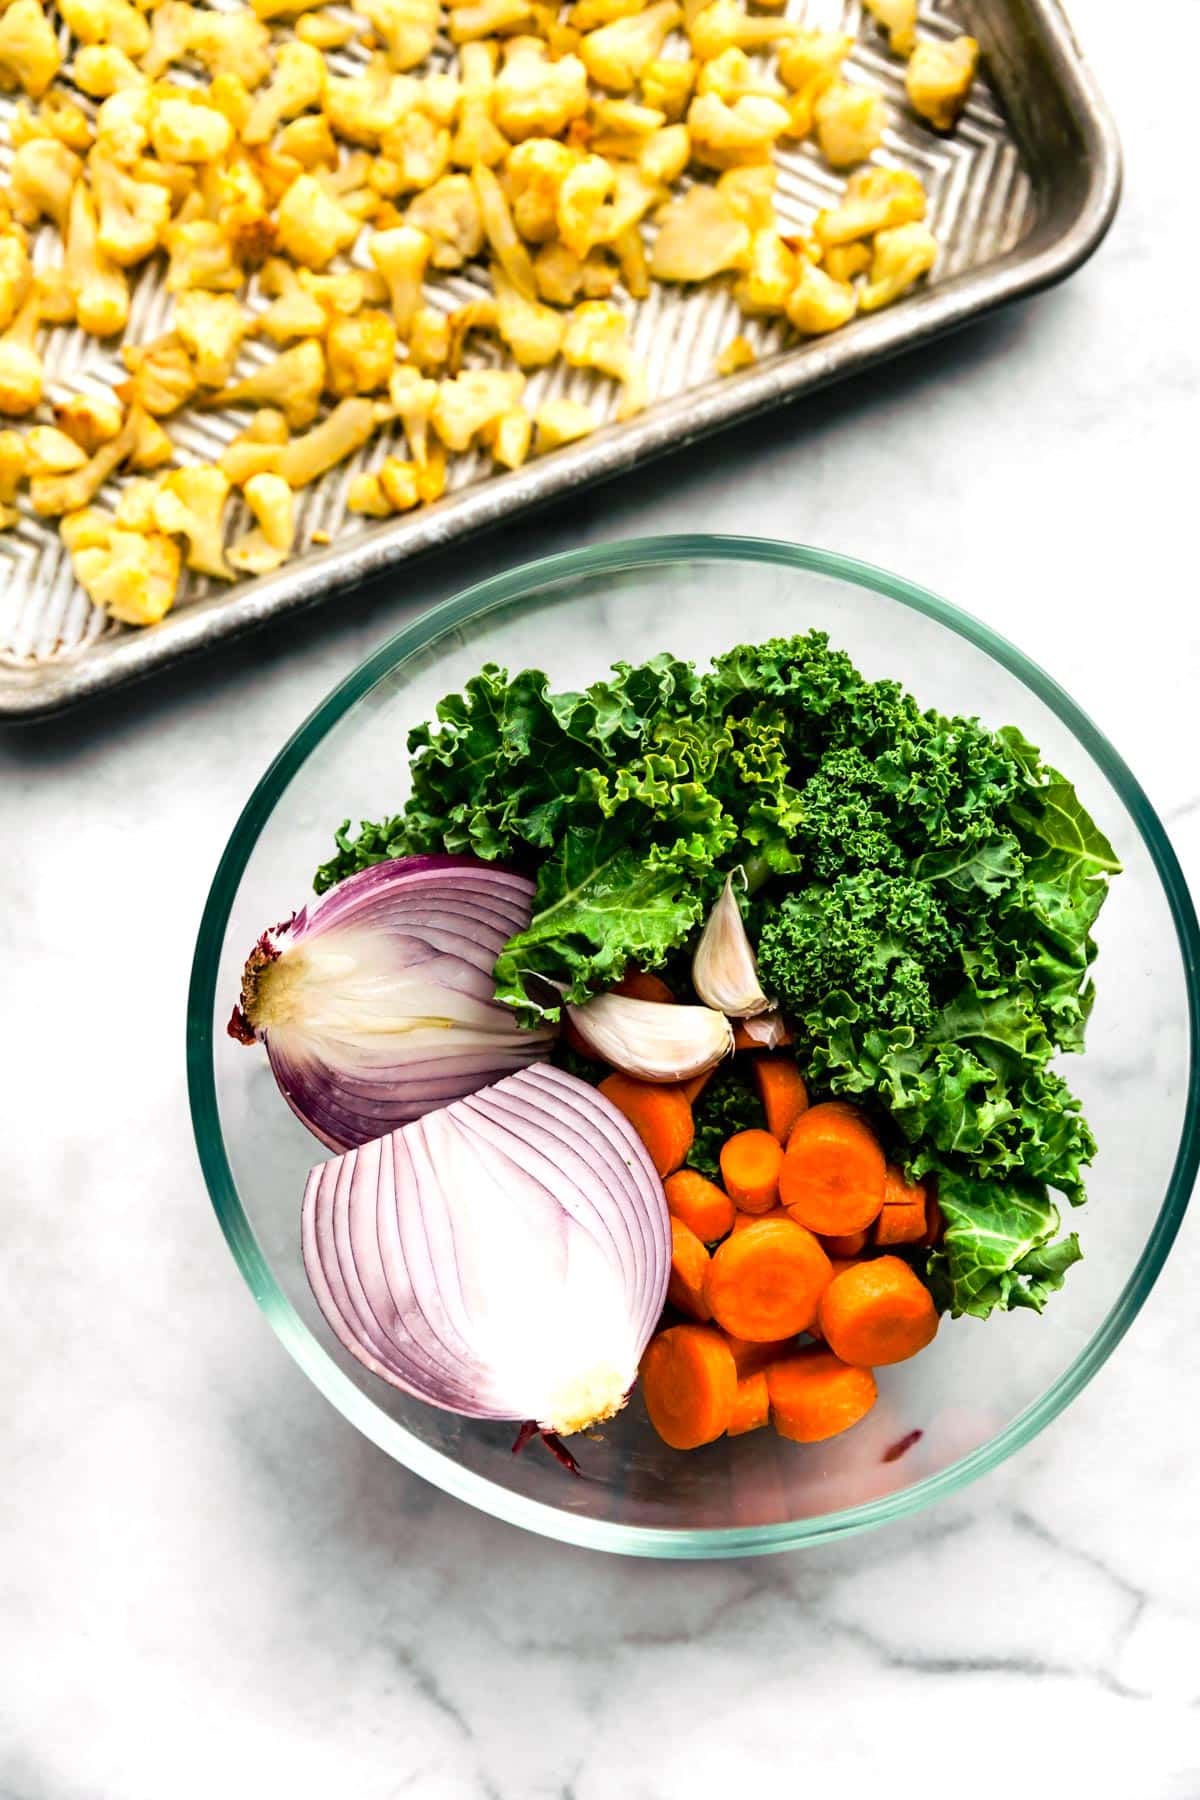 Red onion, carrots, garlic, and kale in a glass bowl together.